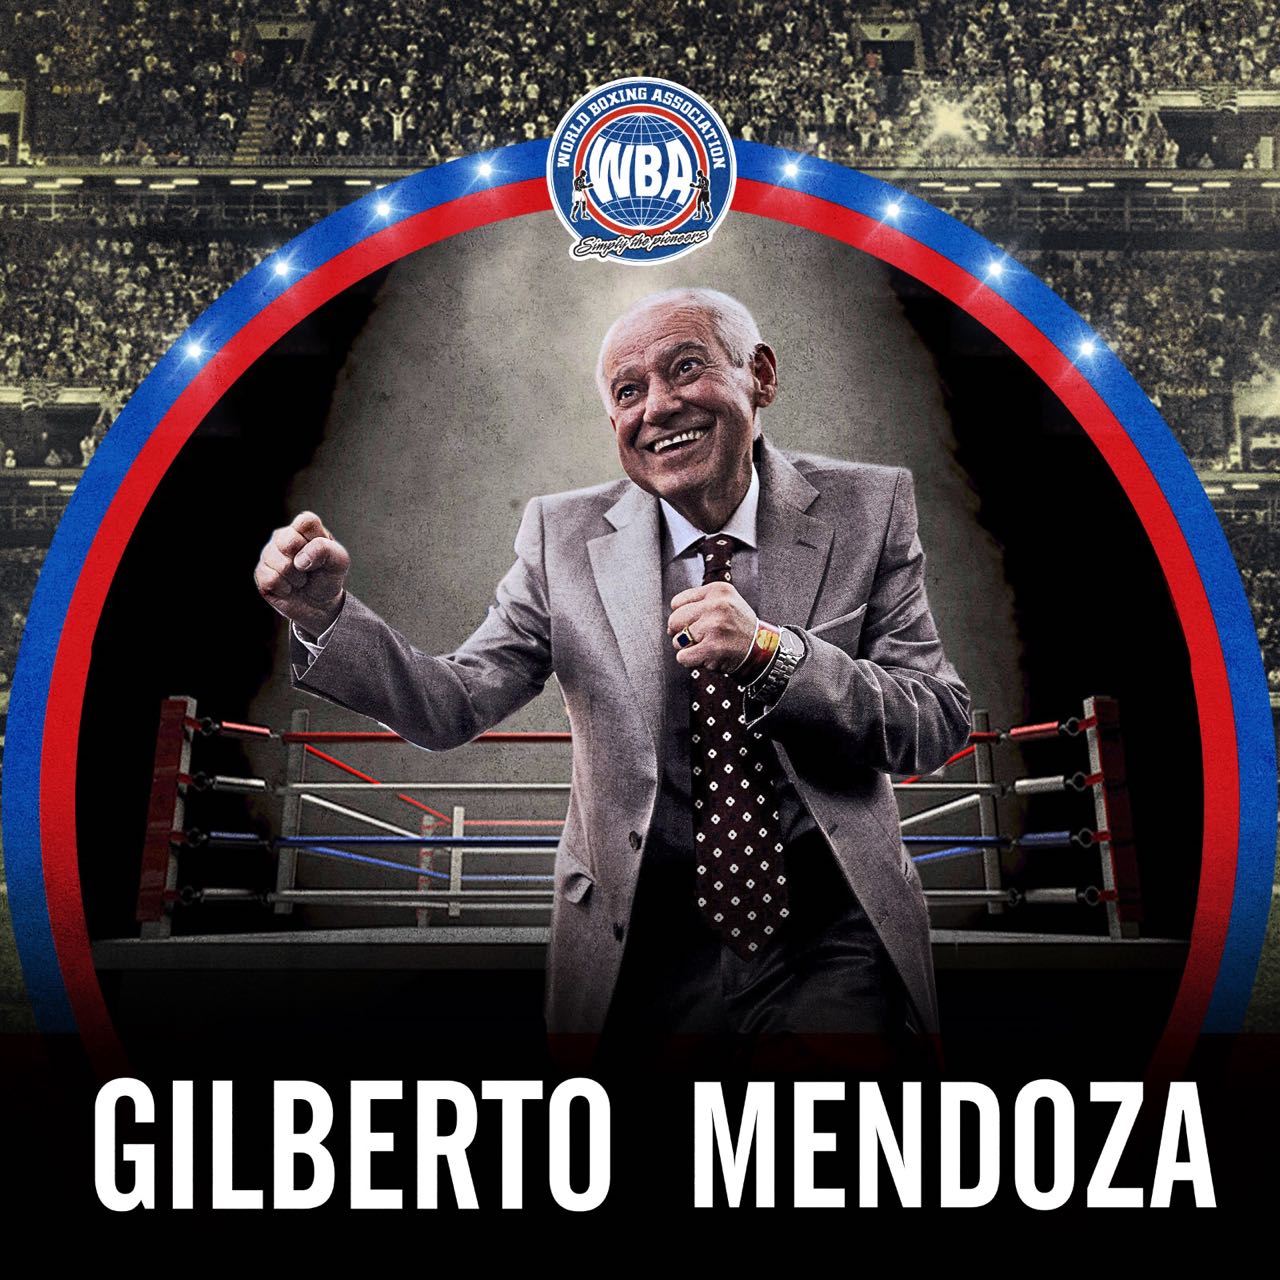 A year without Gilberto Mendoza